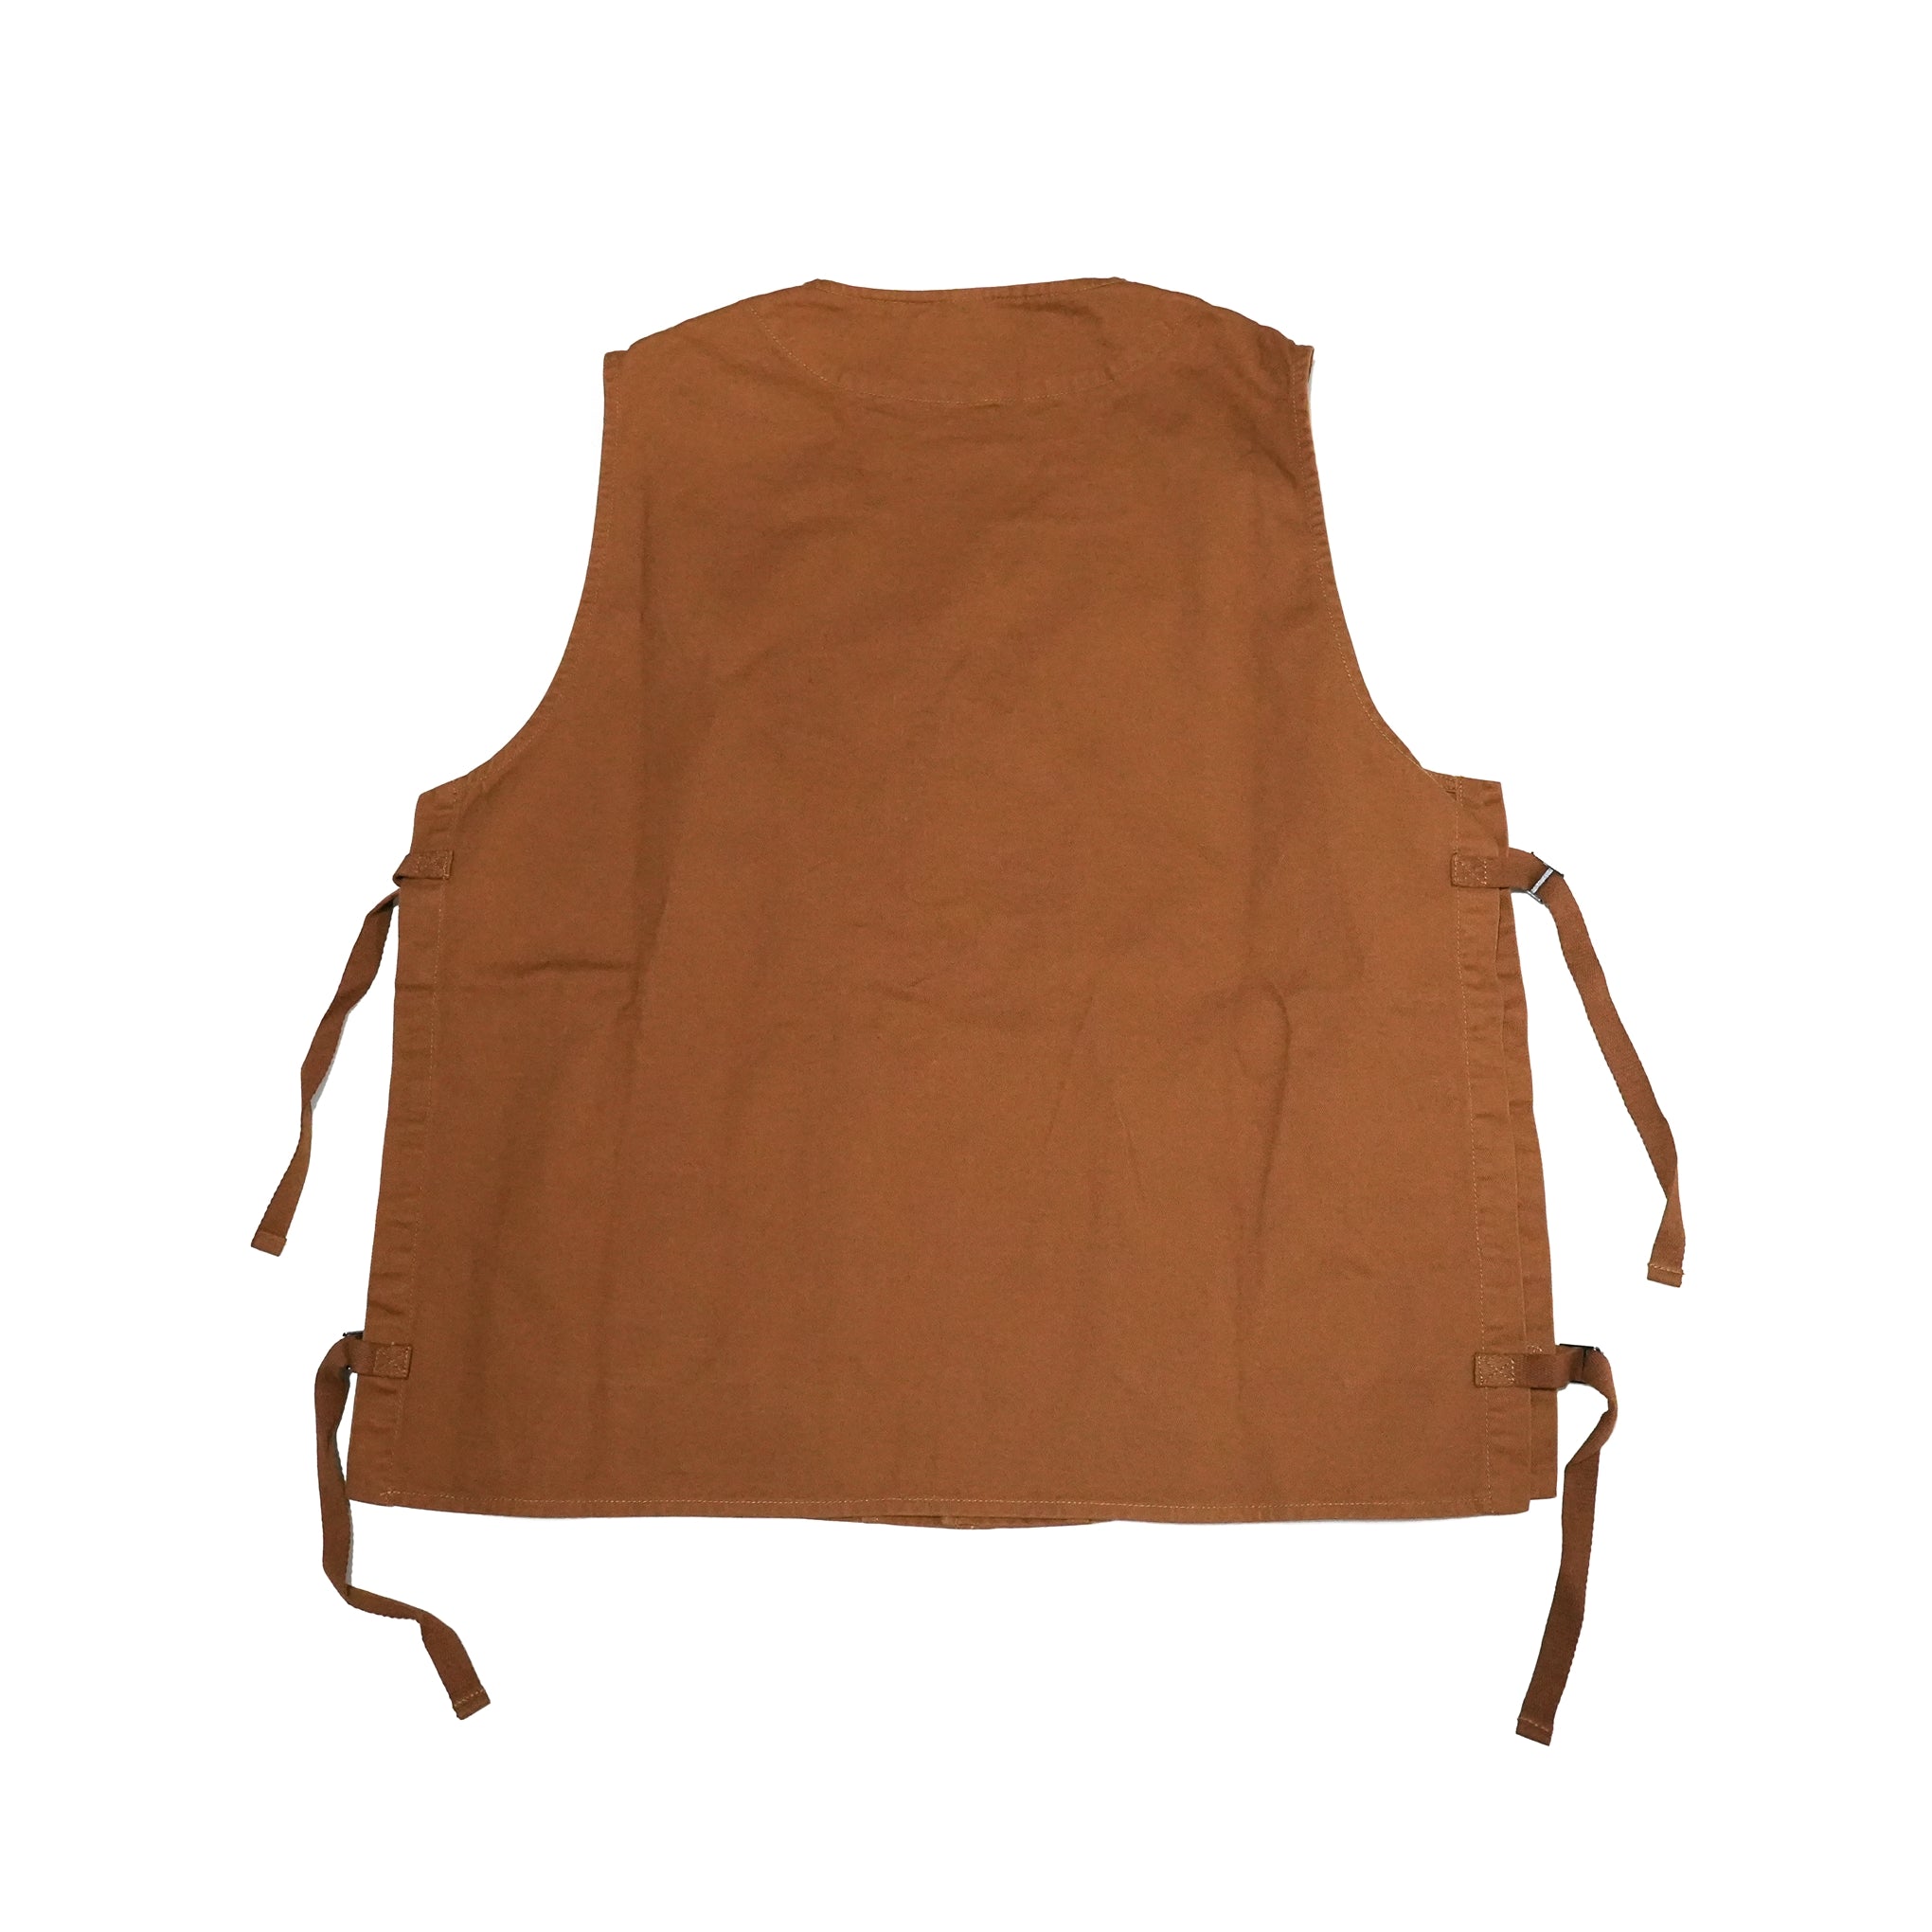 Name:SS23-SHOOTER VEST | Color:Brown | Size:L【WORKWARE】